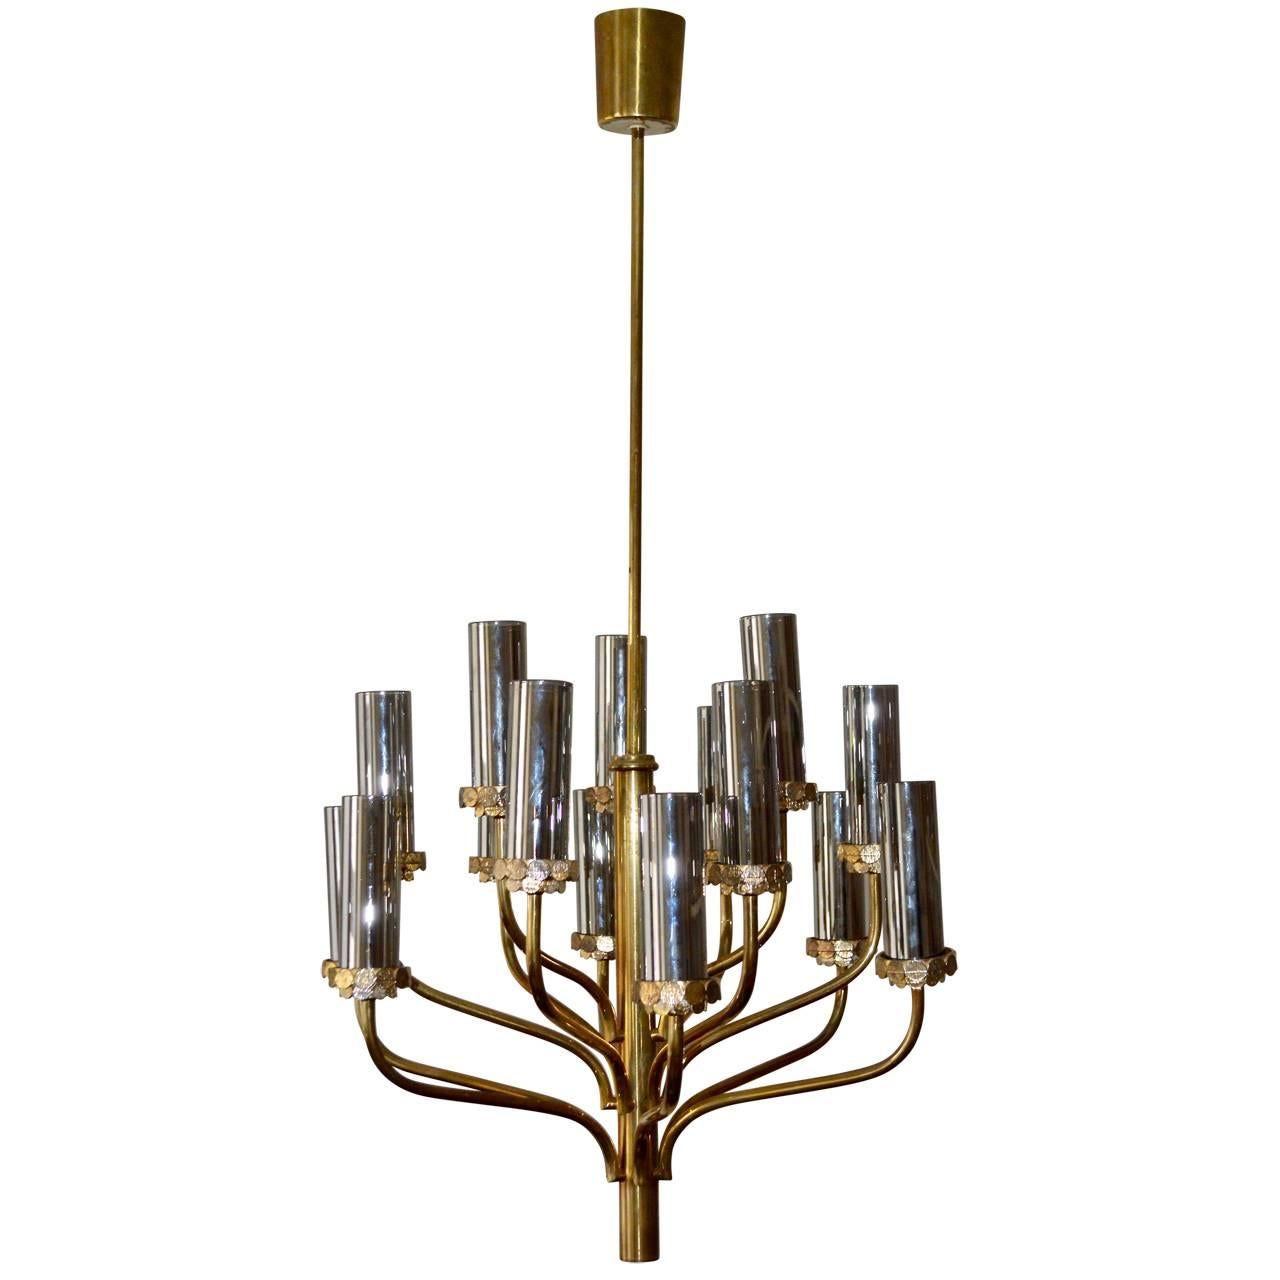 Very beautiful fifteen-light chandelier attributed to Hans Agne Jacobsson. Gives a wonderfull light over the dining table or as sculptural corner light. Very sculptural with or without shades.